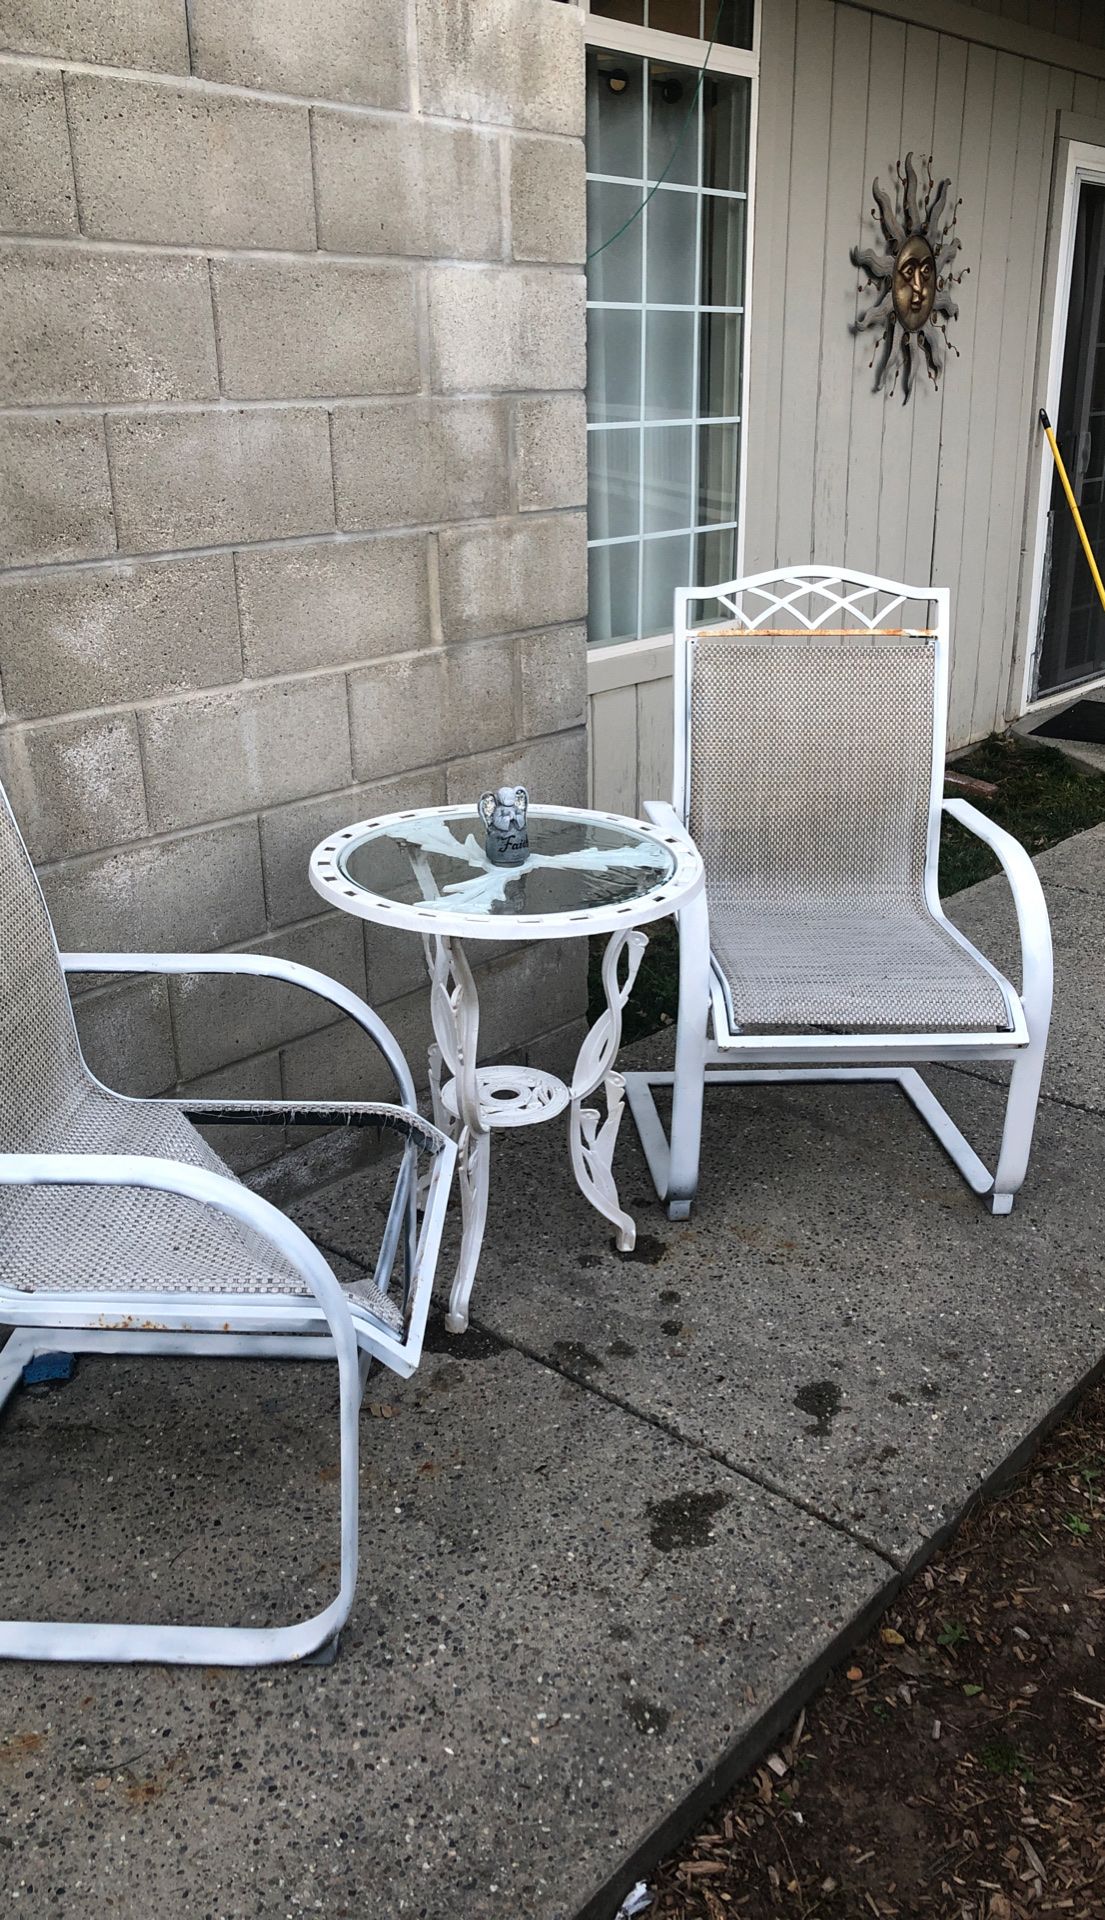 Table For the Garden Set - $20